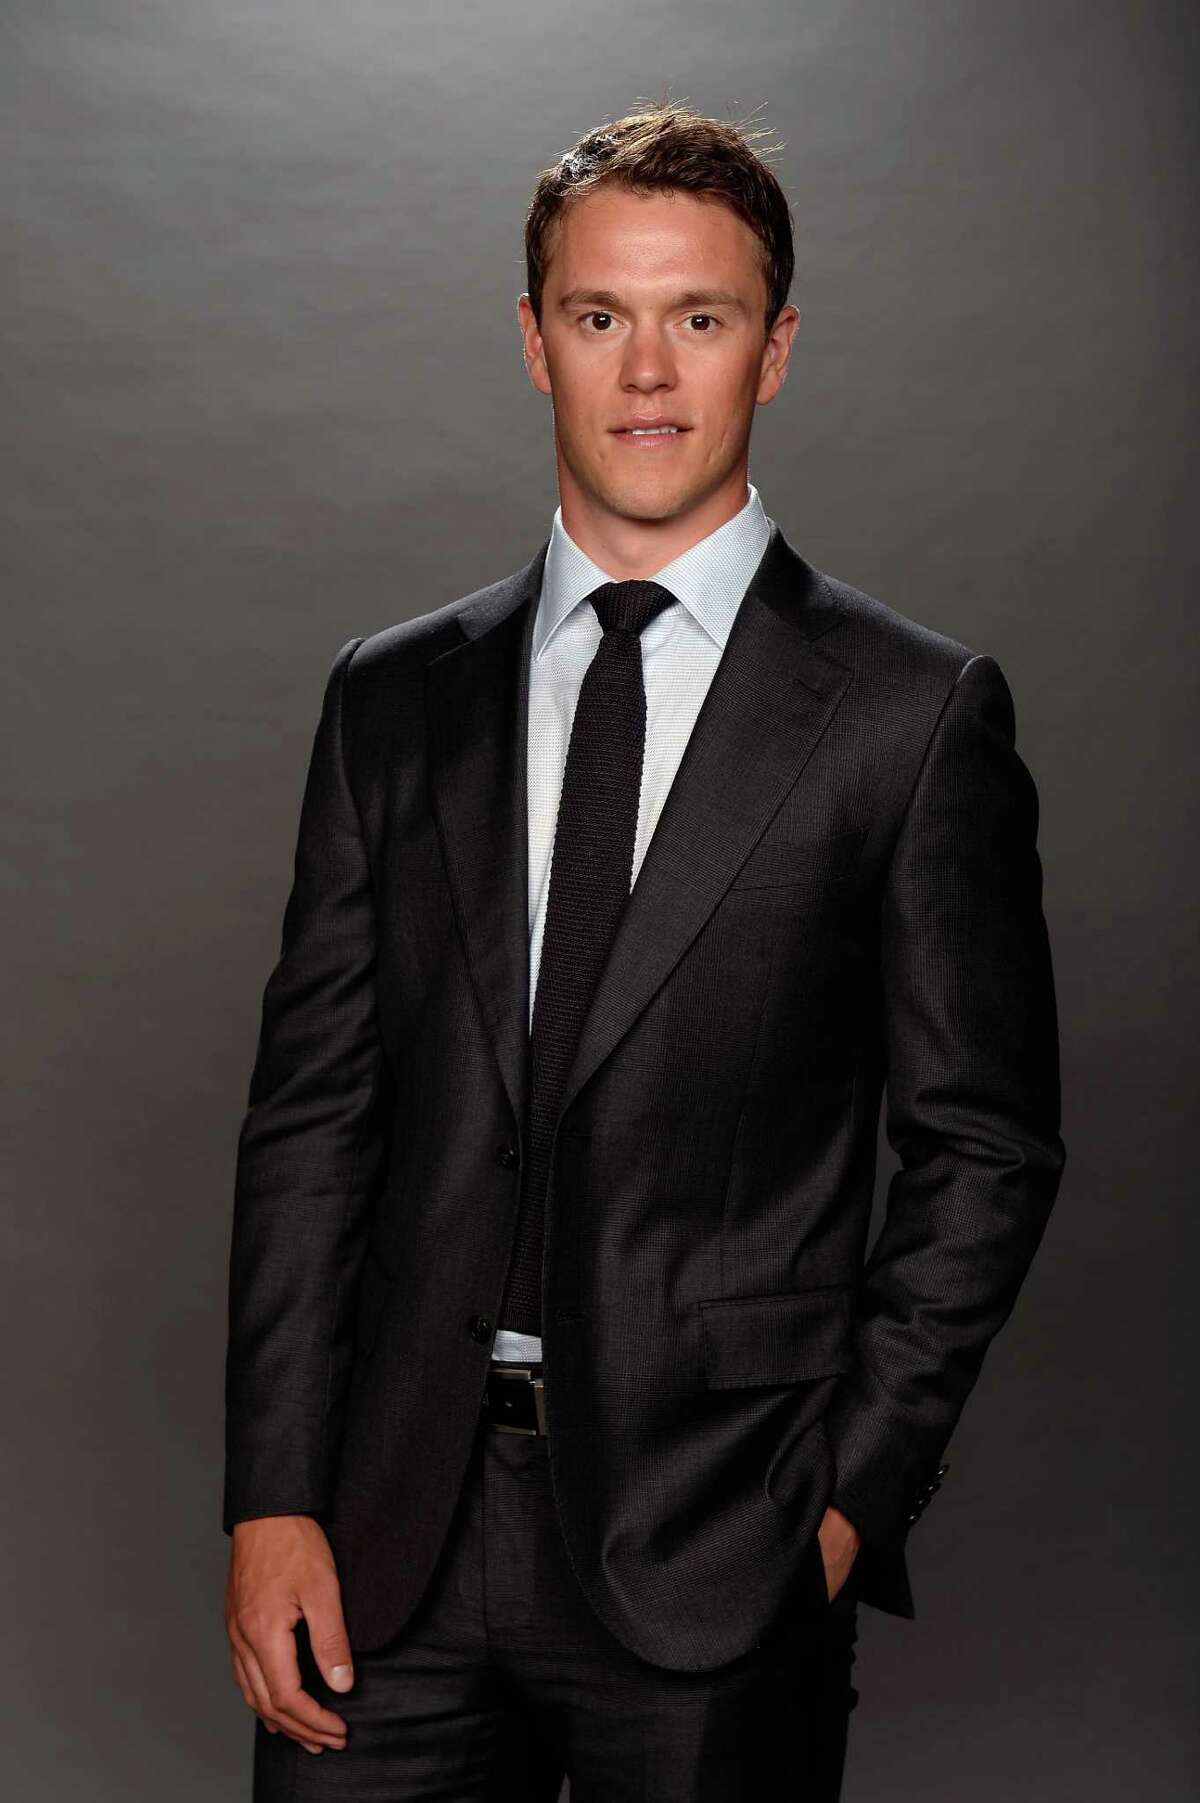 LAS VEGAS, NV - JUNE 24: Jonathan Toews of the Chicago Blackhawks poses for a portrait during the 2014 NHL Awards at Encore Las Vegas on June 24, 2014 in Las Vegas, Nevada. (Photo by Harry How/Getty Images)